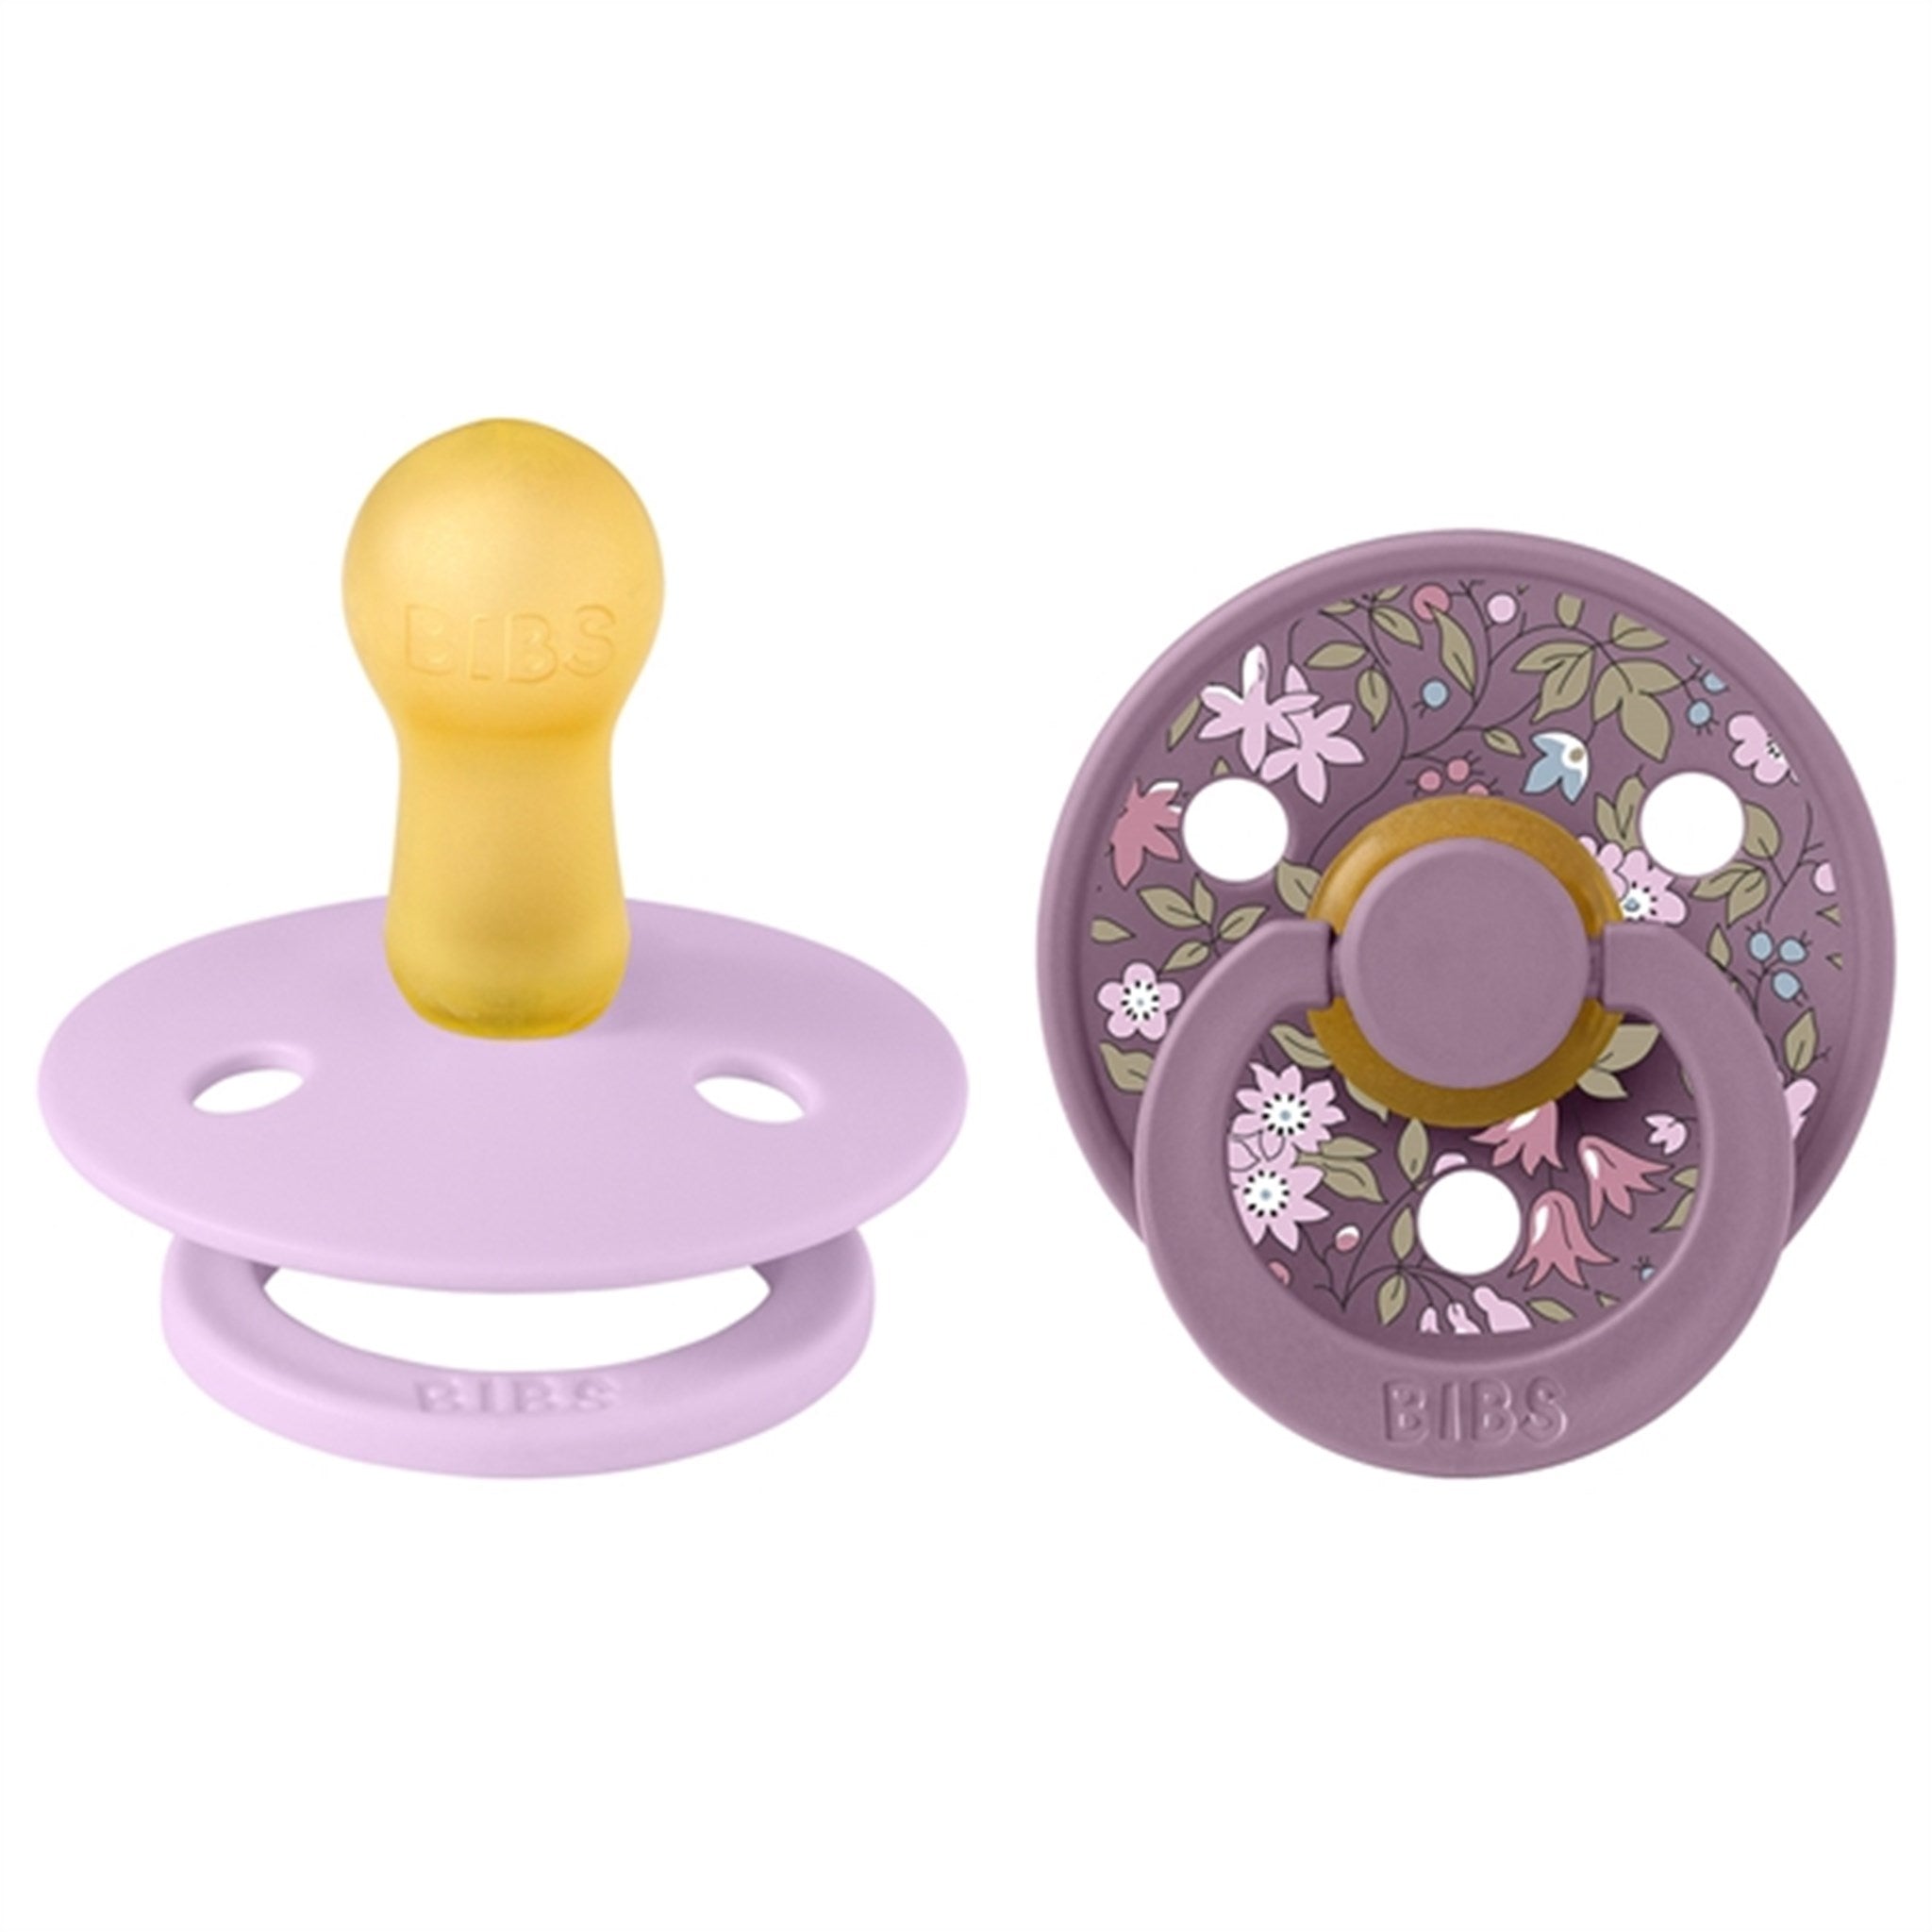 Bibs x Liberty Latex Pacifier 2-pack Chamomile Lawn Violet Sky Mix